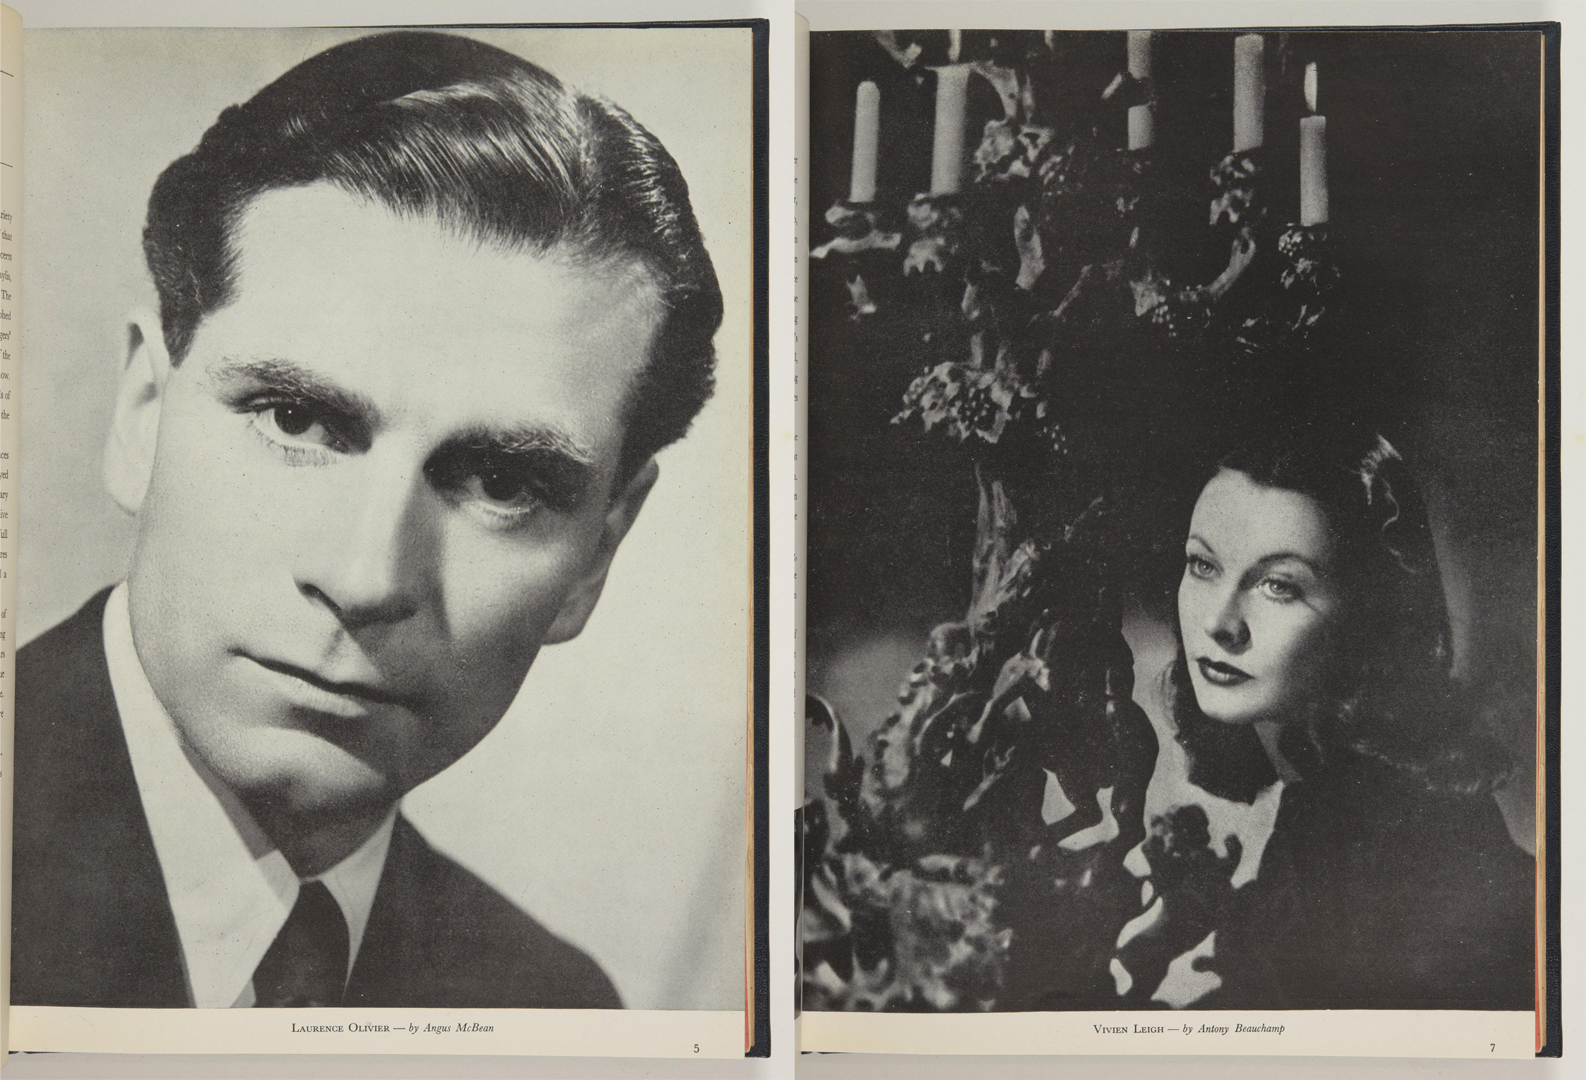 Laurence Olivier and Vivien Leigh in the Old Vic Theatre programme 1948